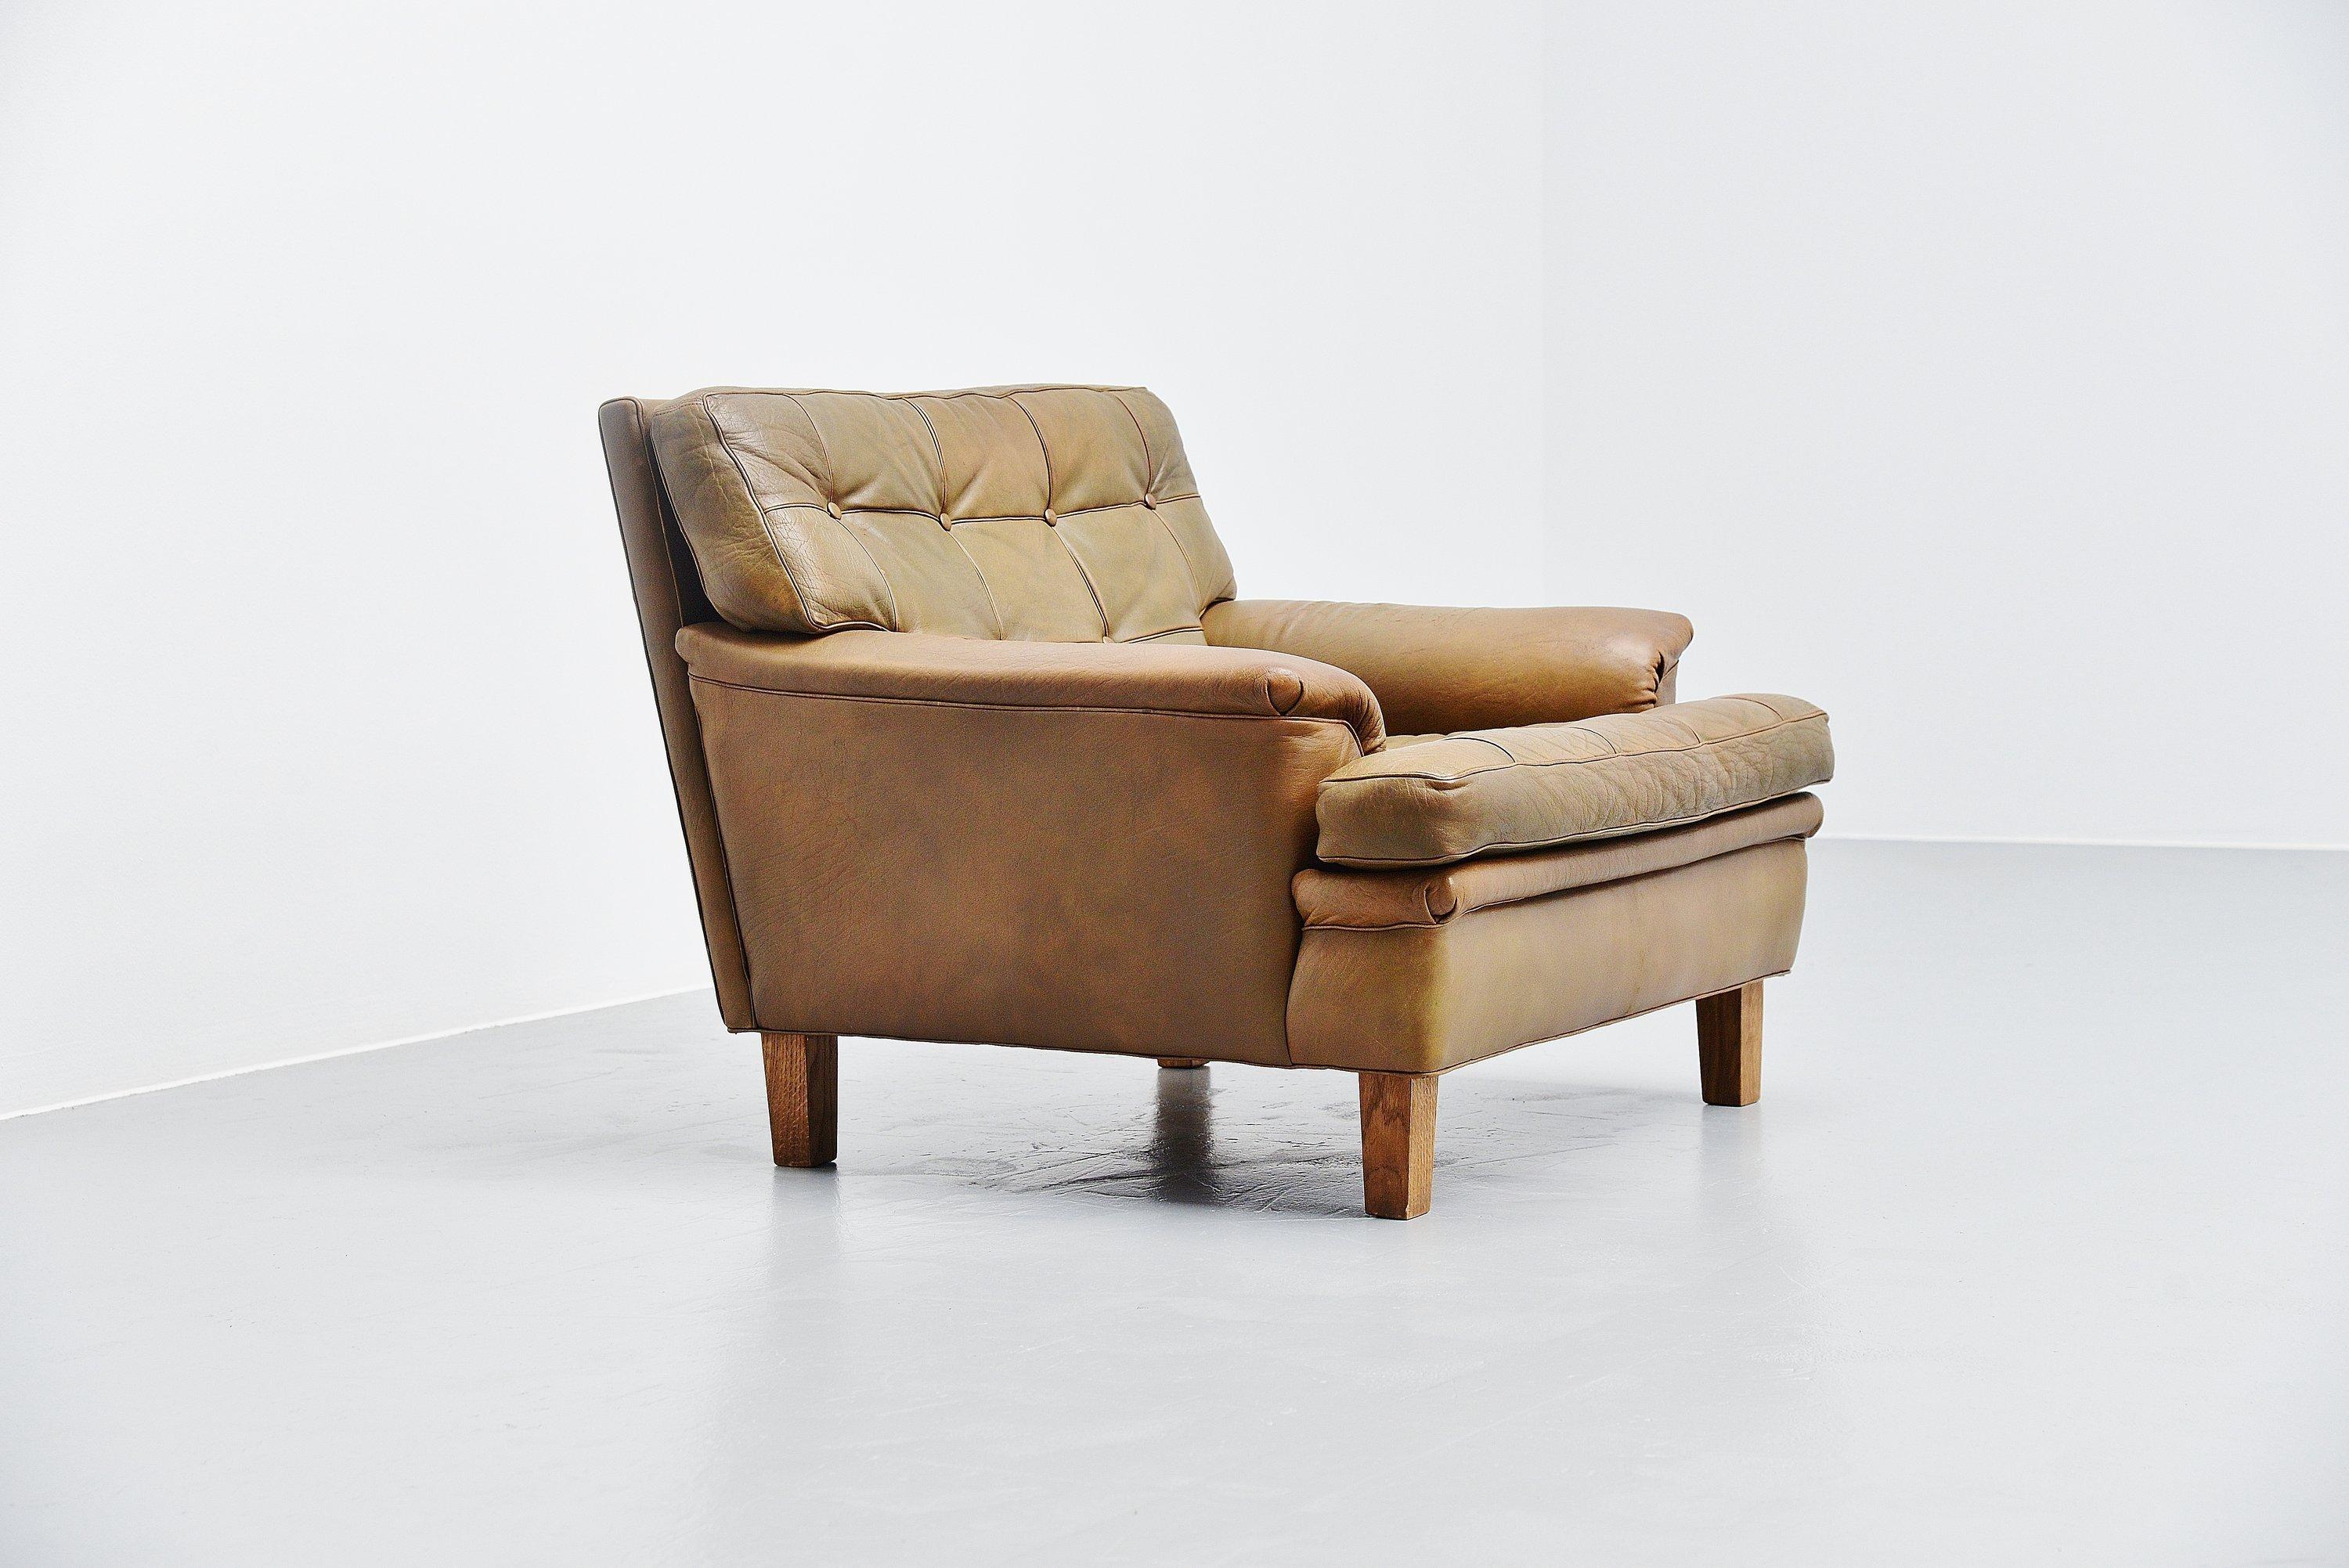 Arne Norell Merkur Lounge Chair, Sweden, 1960 In Good Condition For Sale In Roosendaal, Noord Brabant